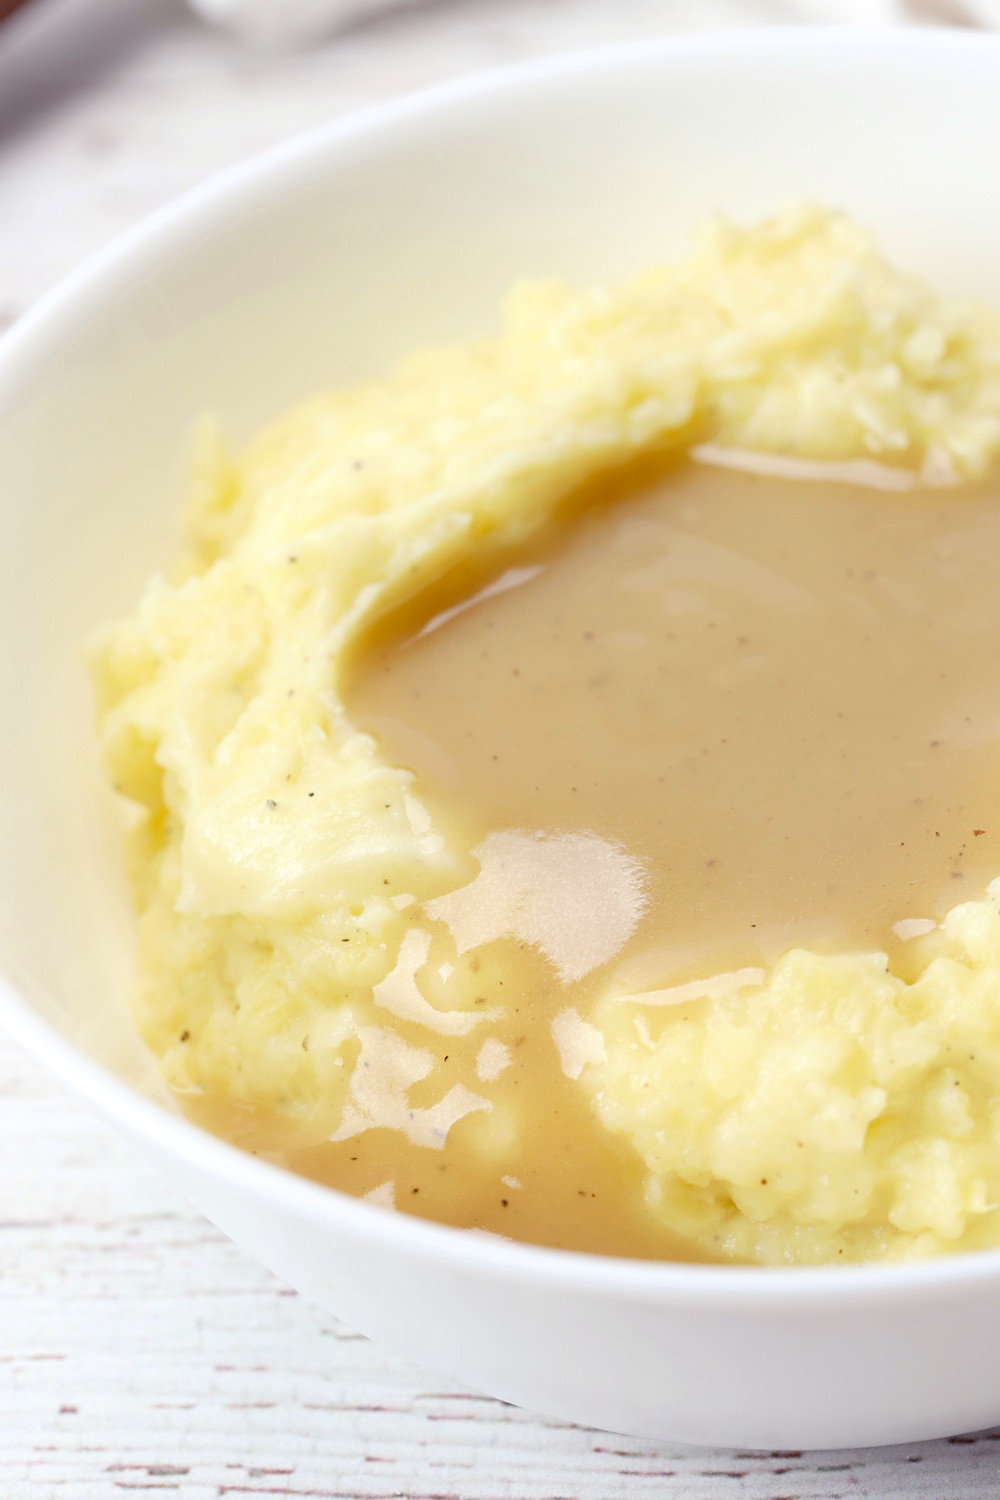 White bowl filled with mashed potatoes and gravy.